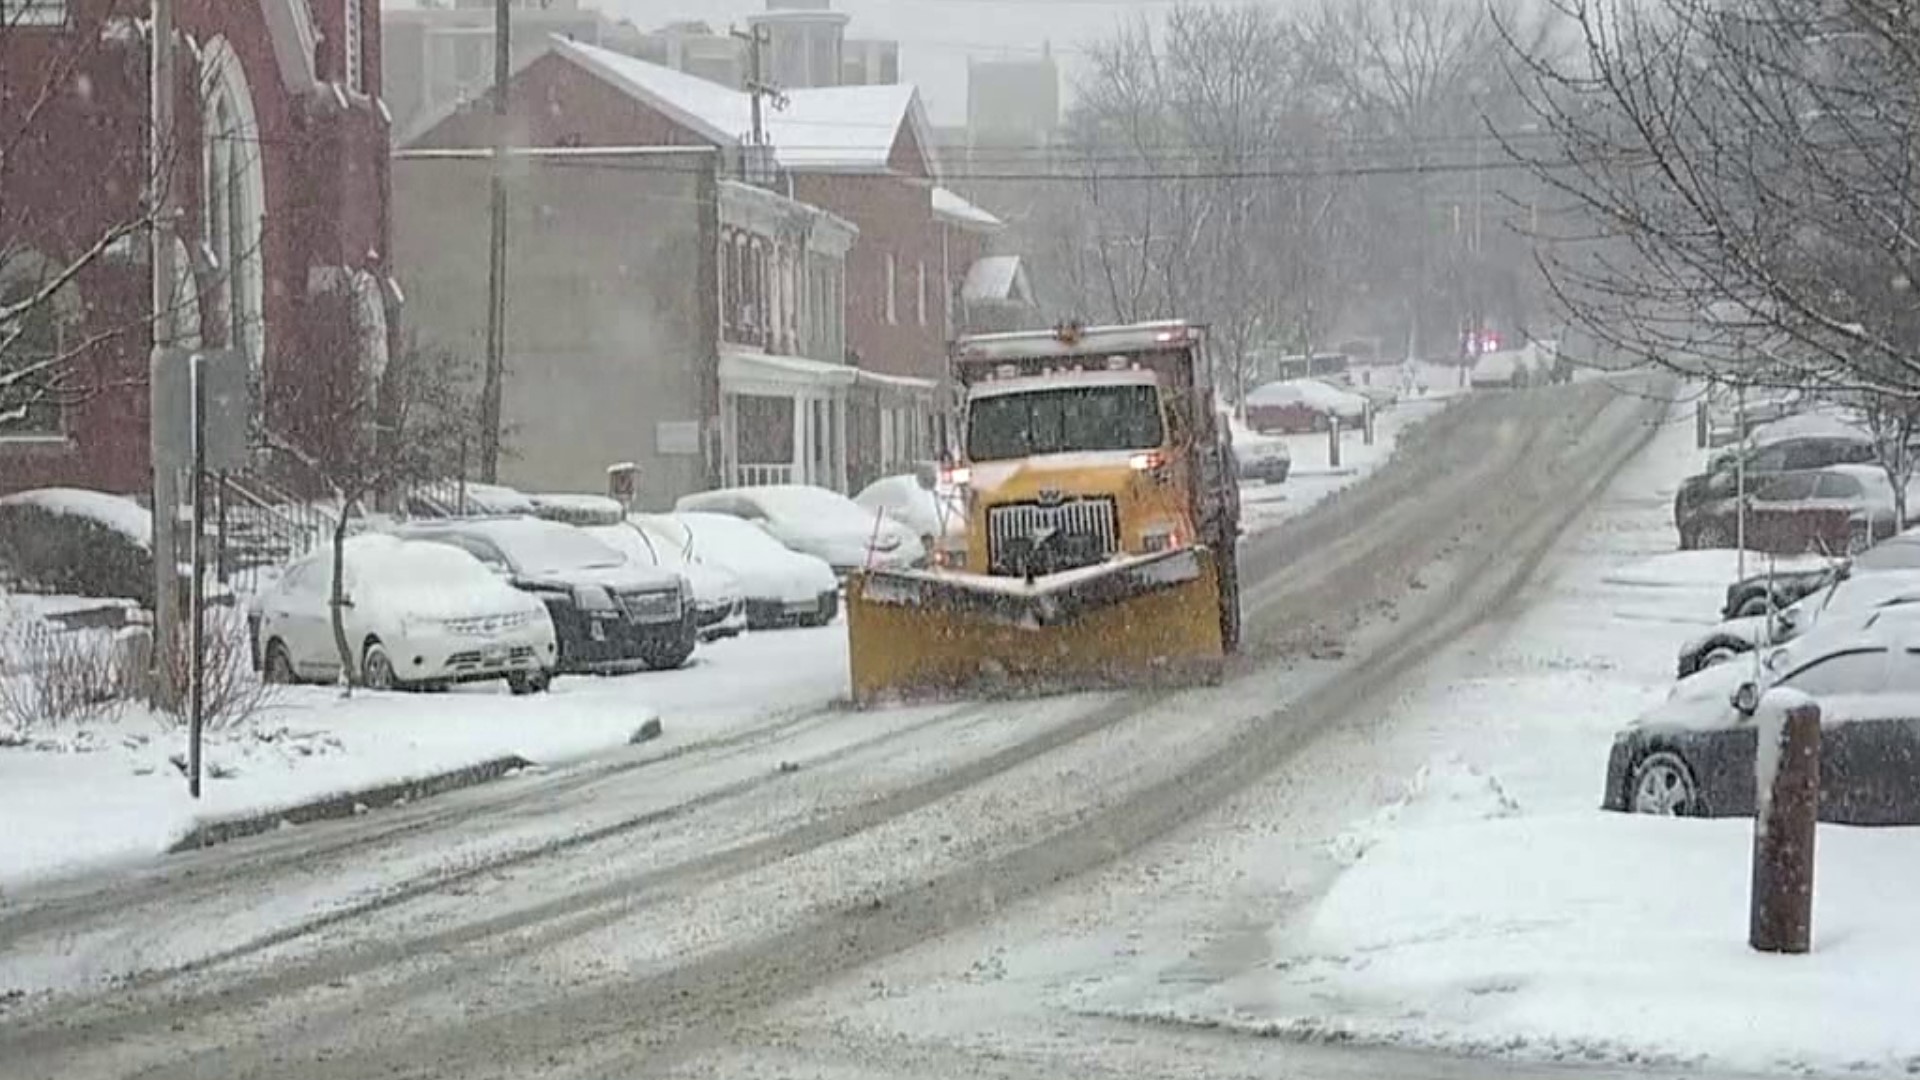 Pennsylvania ranked number 5 for most dangerous states to drive during the winter months, according to a new study.